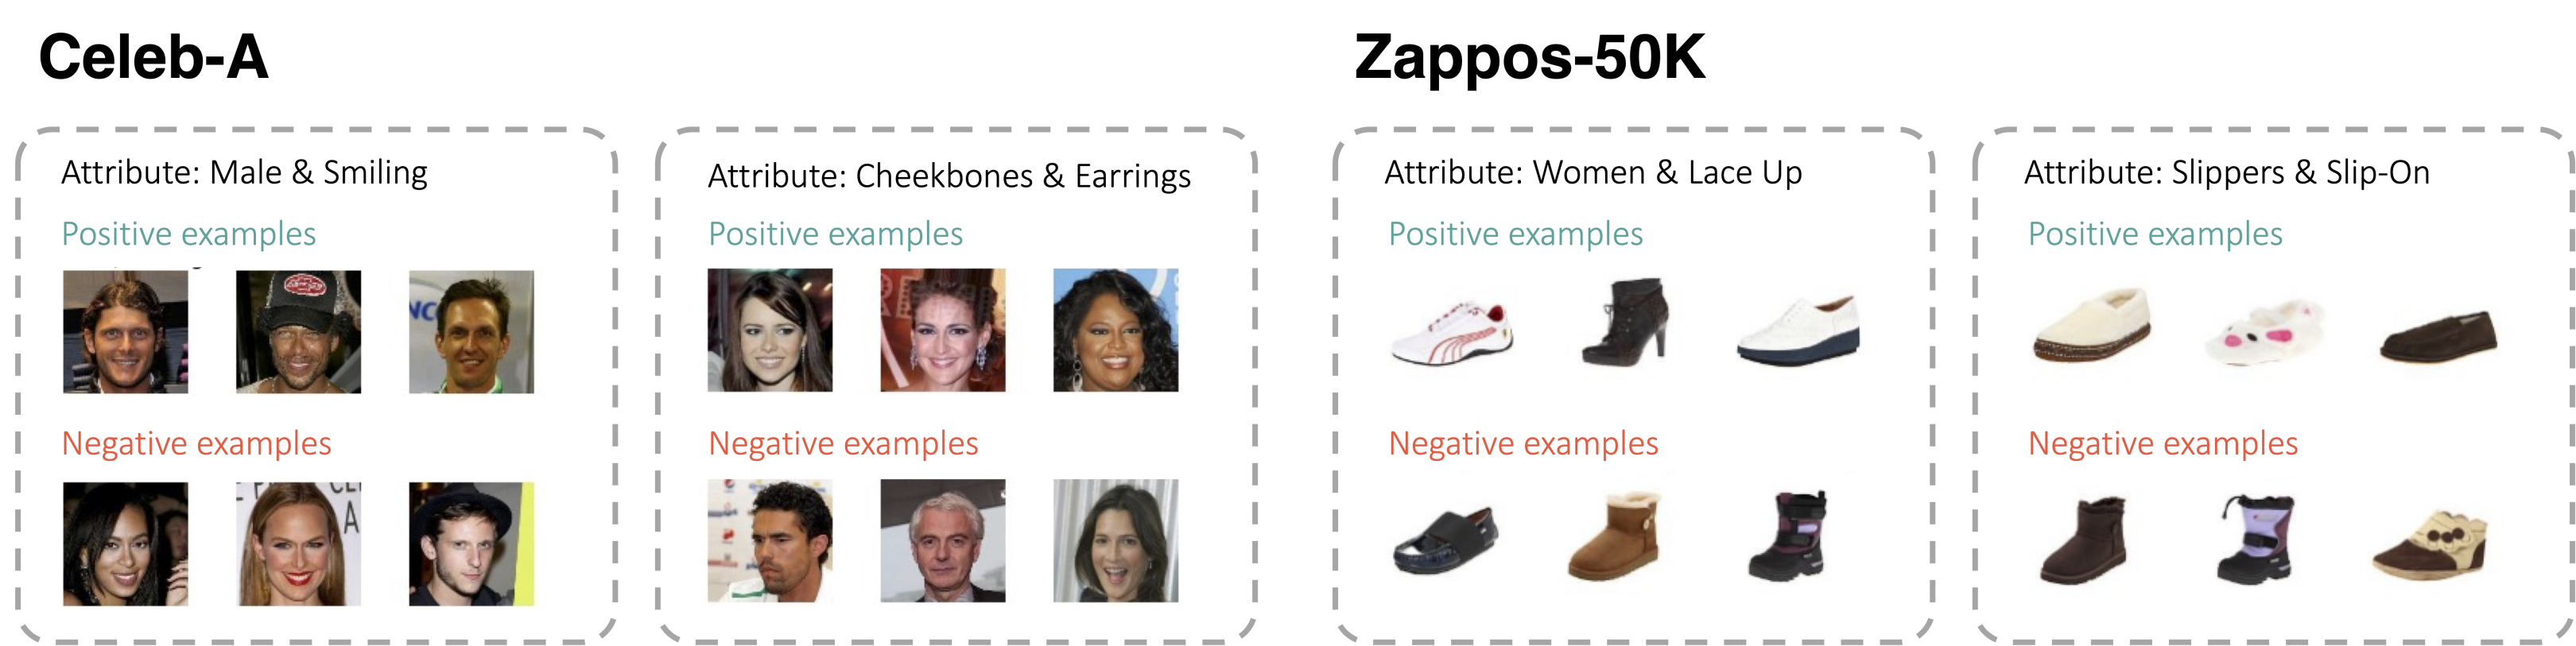 
Positive and negative examples are sampled according to attributes.